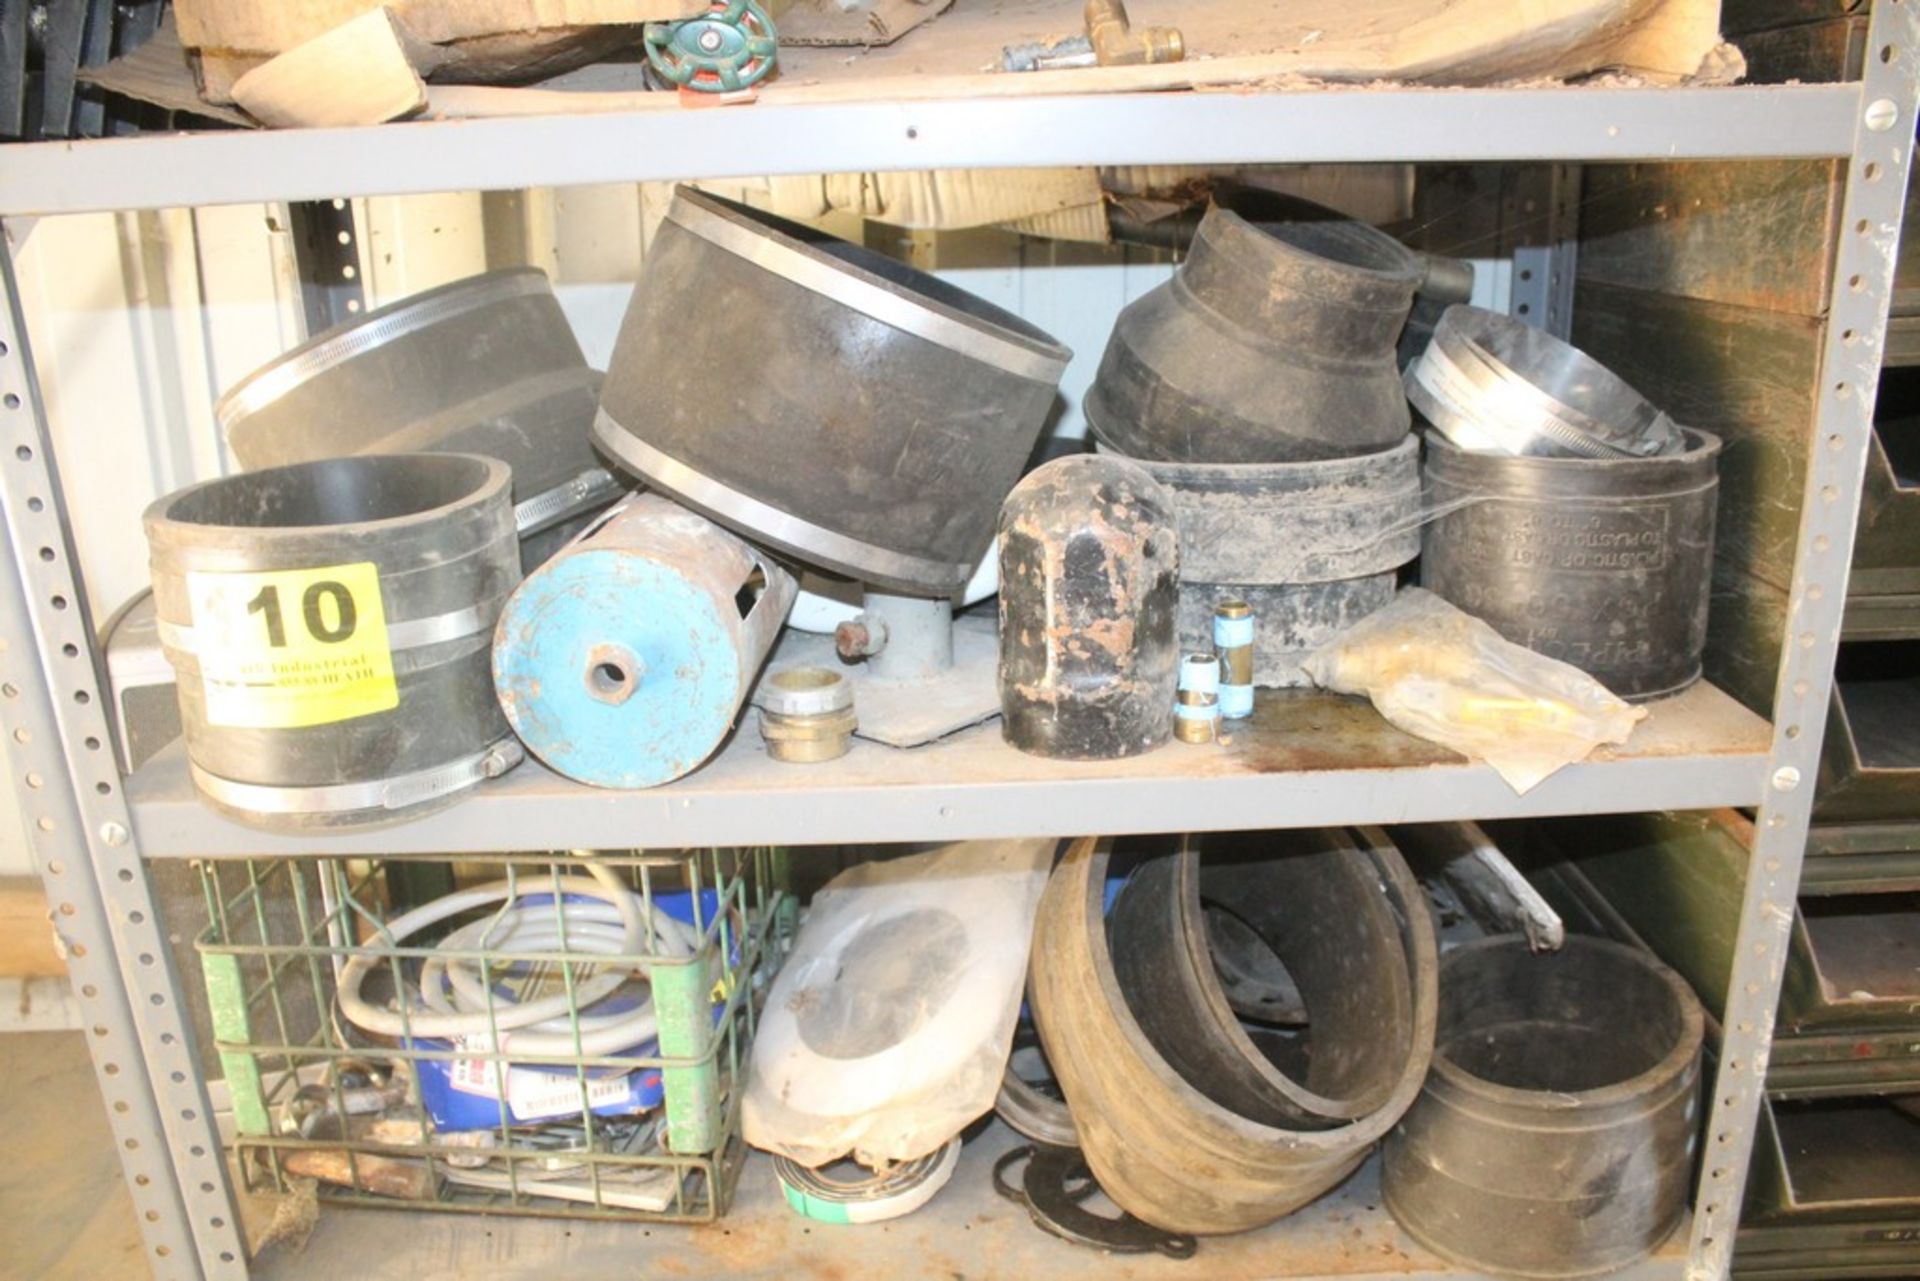 CONTENTS OF (3) SHELVING UNITS INCLUDING GASKETS, COUPLERS, FITTINGS & MISC. PLUMBING SUPPLIES (NO - Image 2 of 4